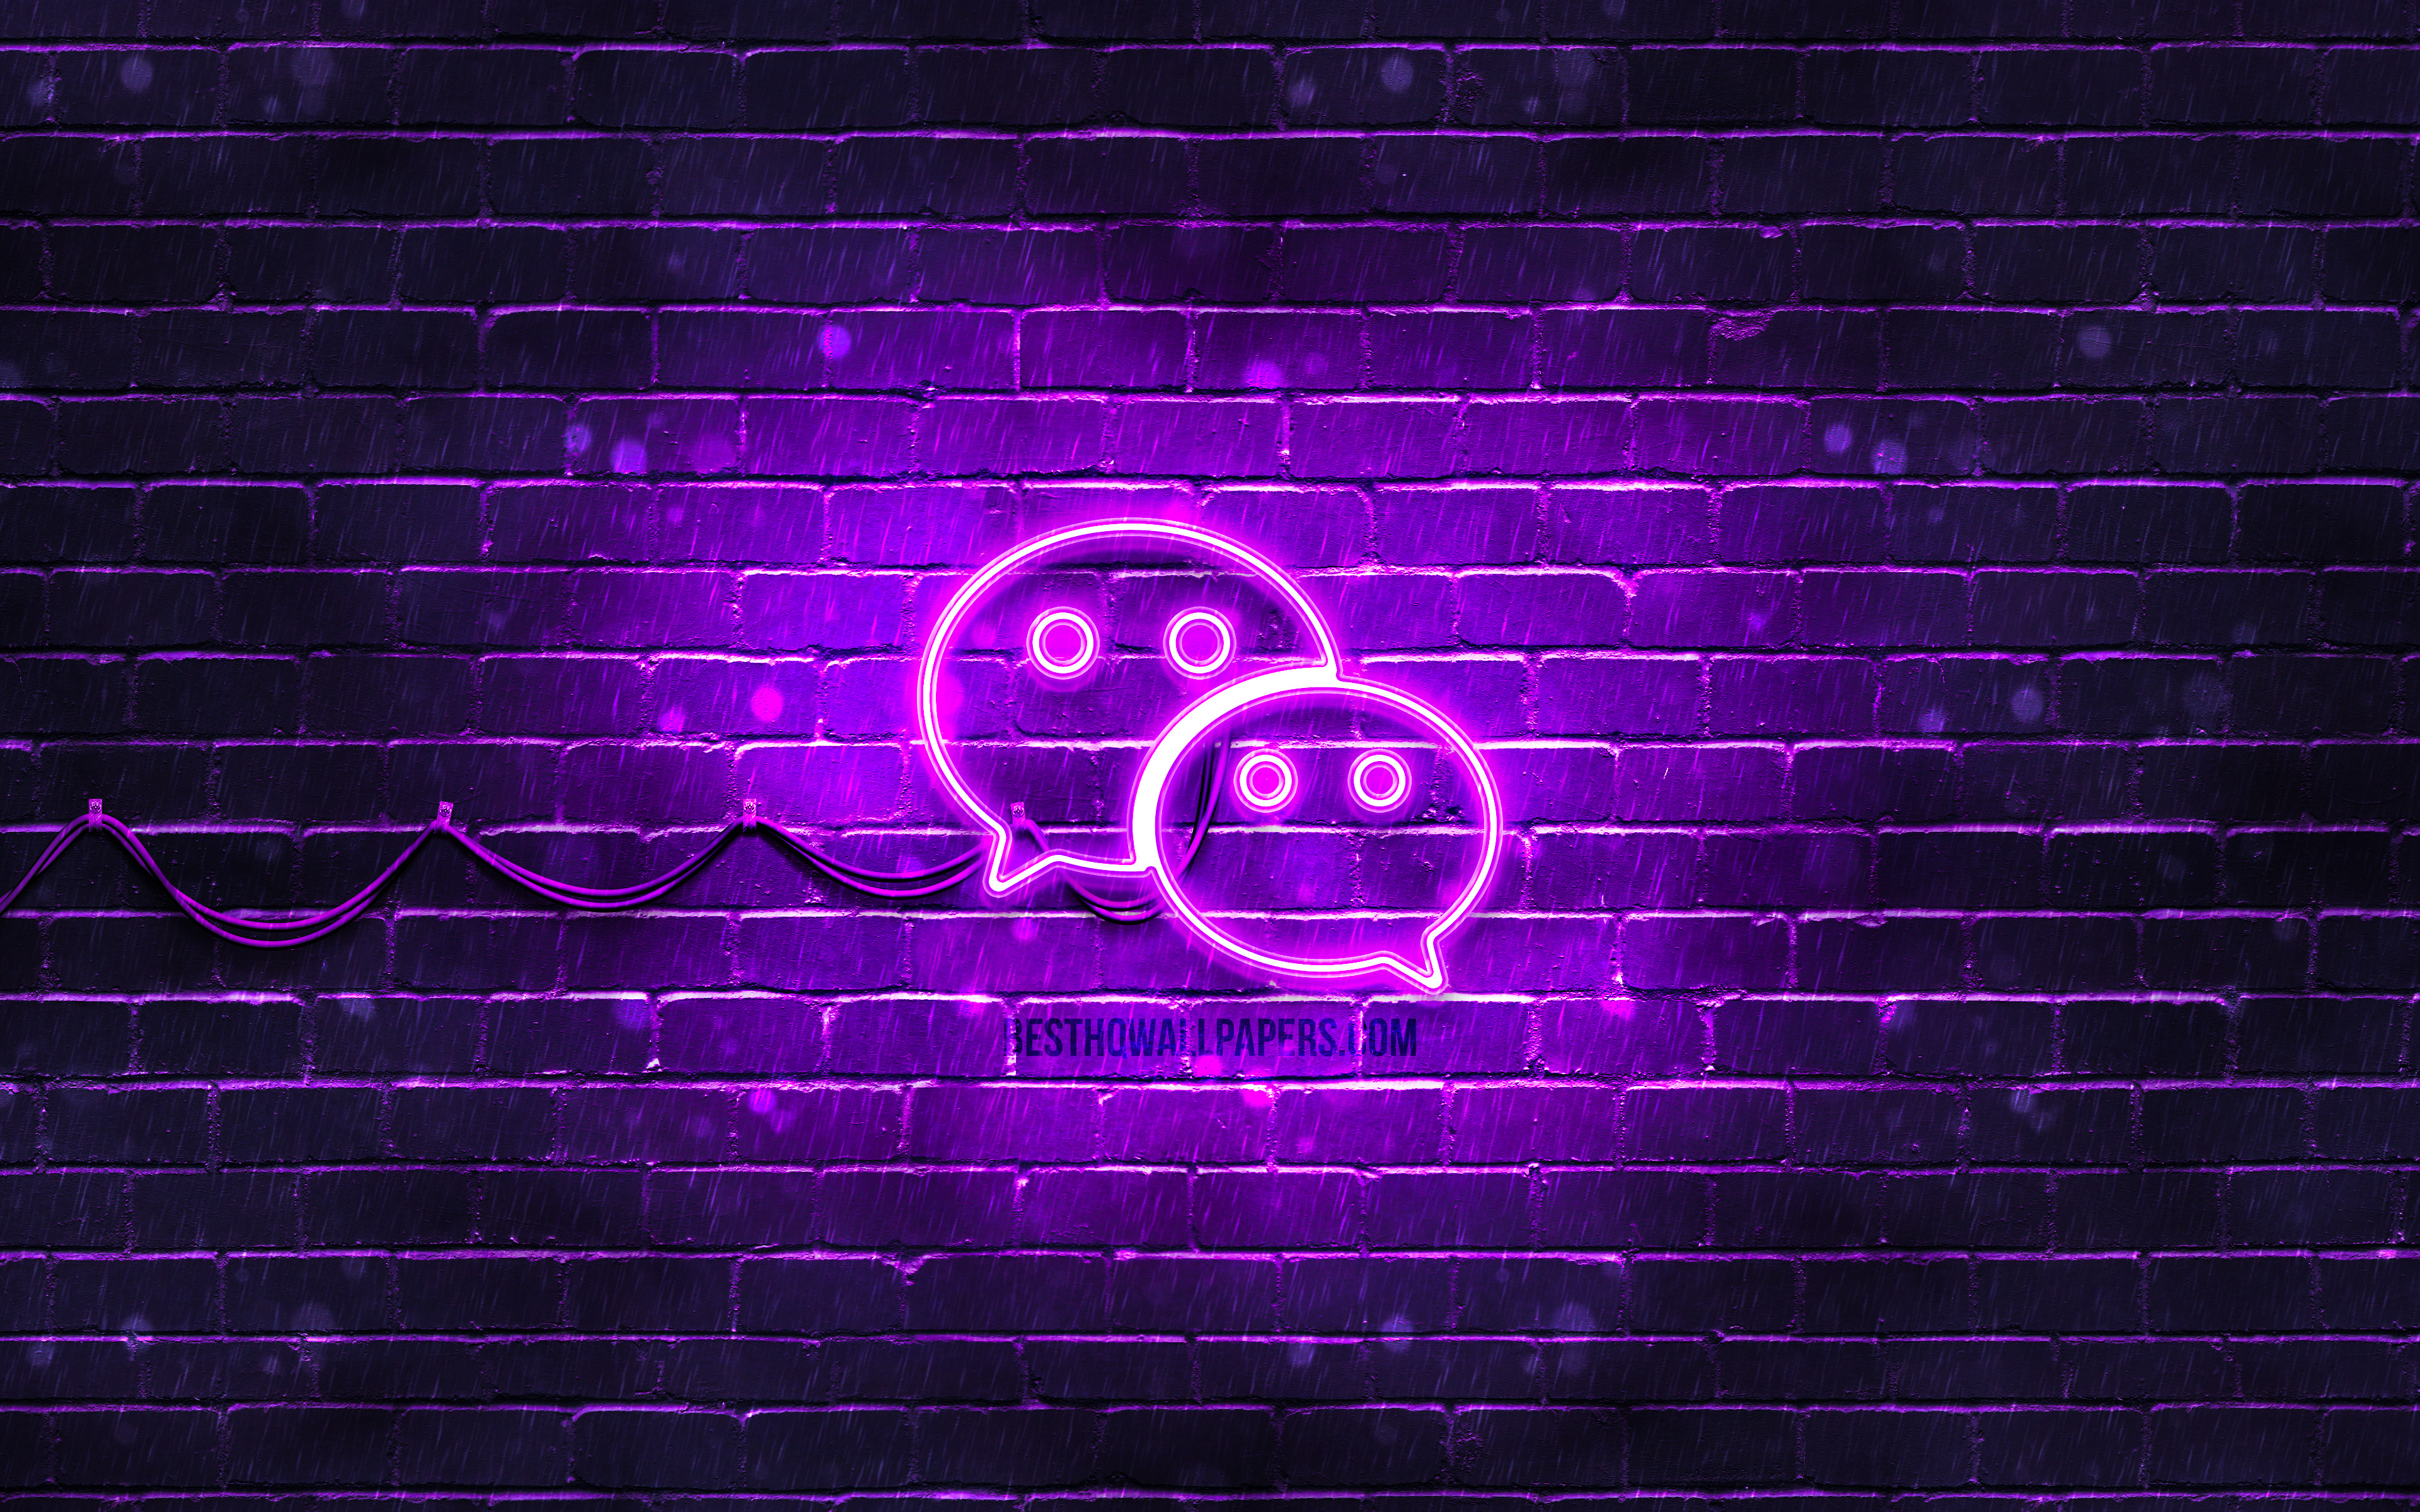 Download wallpaper WeChat violet logo, 4k, violet brickwall, WeChat logo, social networks, WeChat neon logo, WeChat for desktop with resolution 3840x2400. High Quality HD picture wallpaper